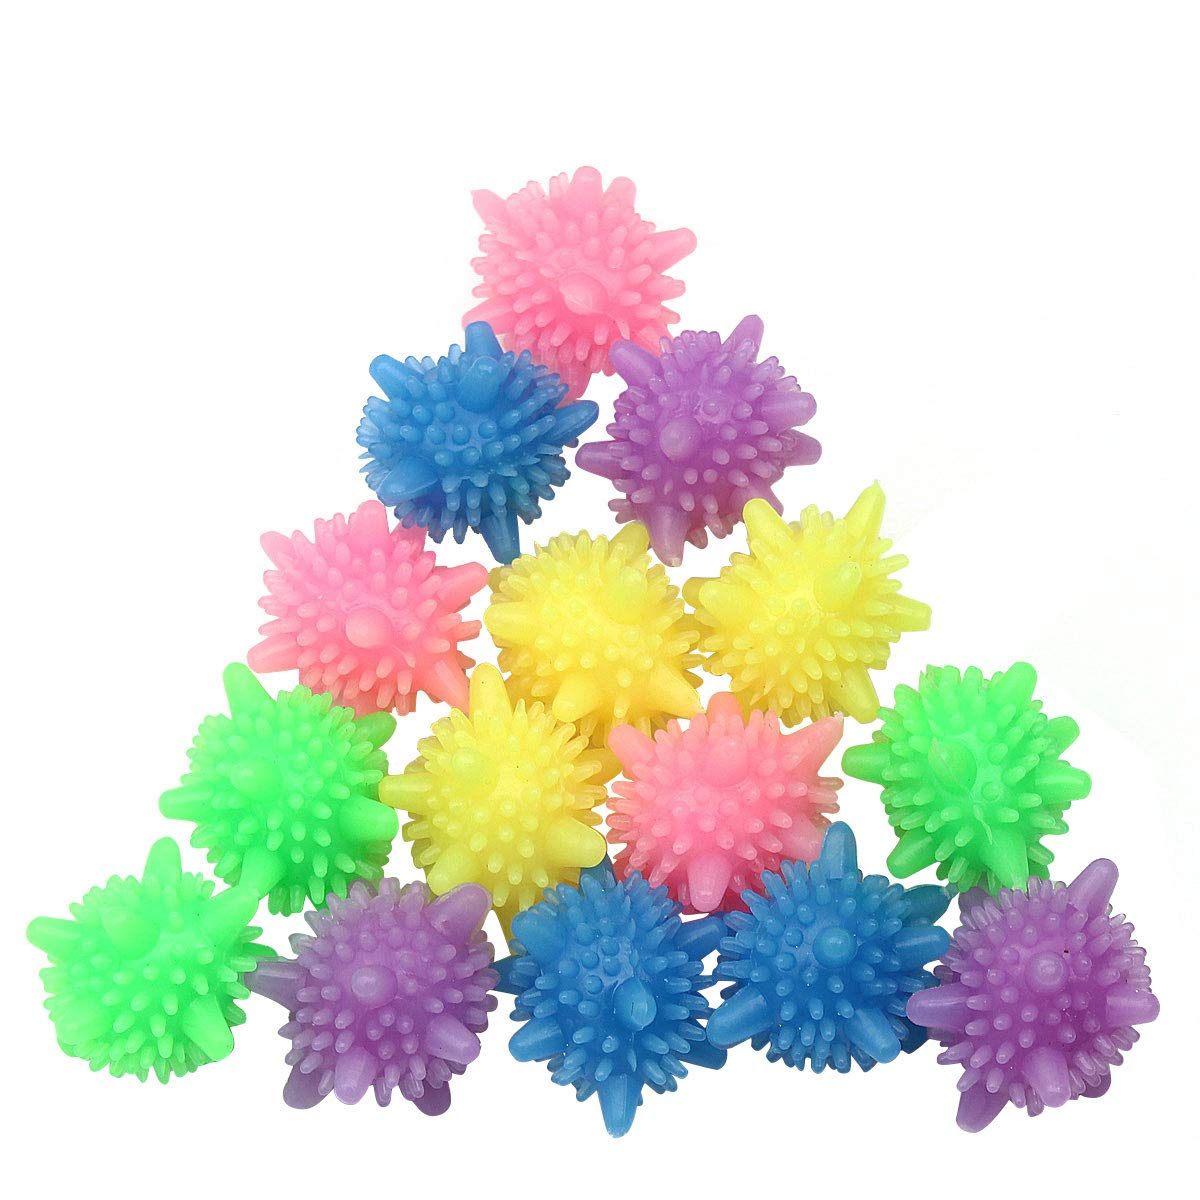 a140-01 2Pcs Washer Balls,Reusable Tangle-Free Eco-Friendly Laundry Scrubbing Balls,Solid Colorful Laundry Washing Balls Enhance Your Machine Cleaning Power